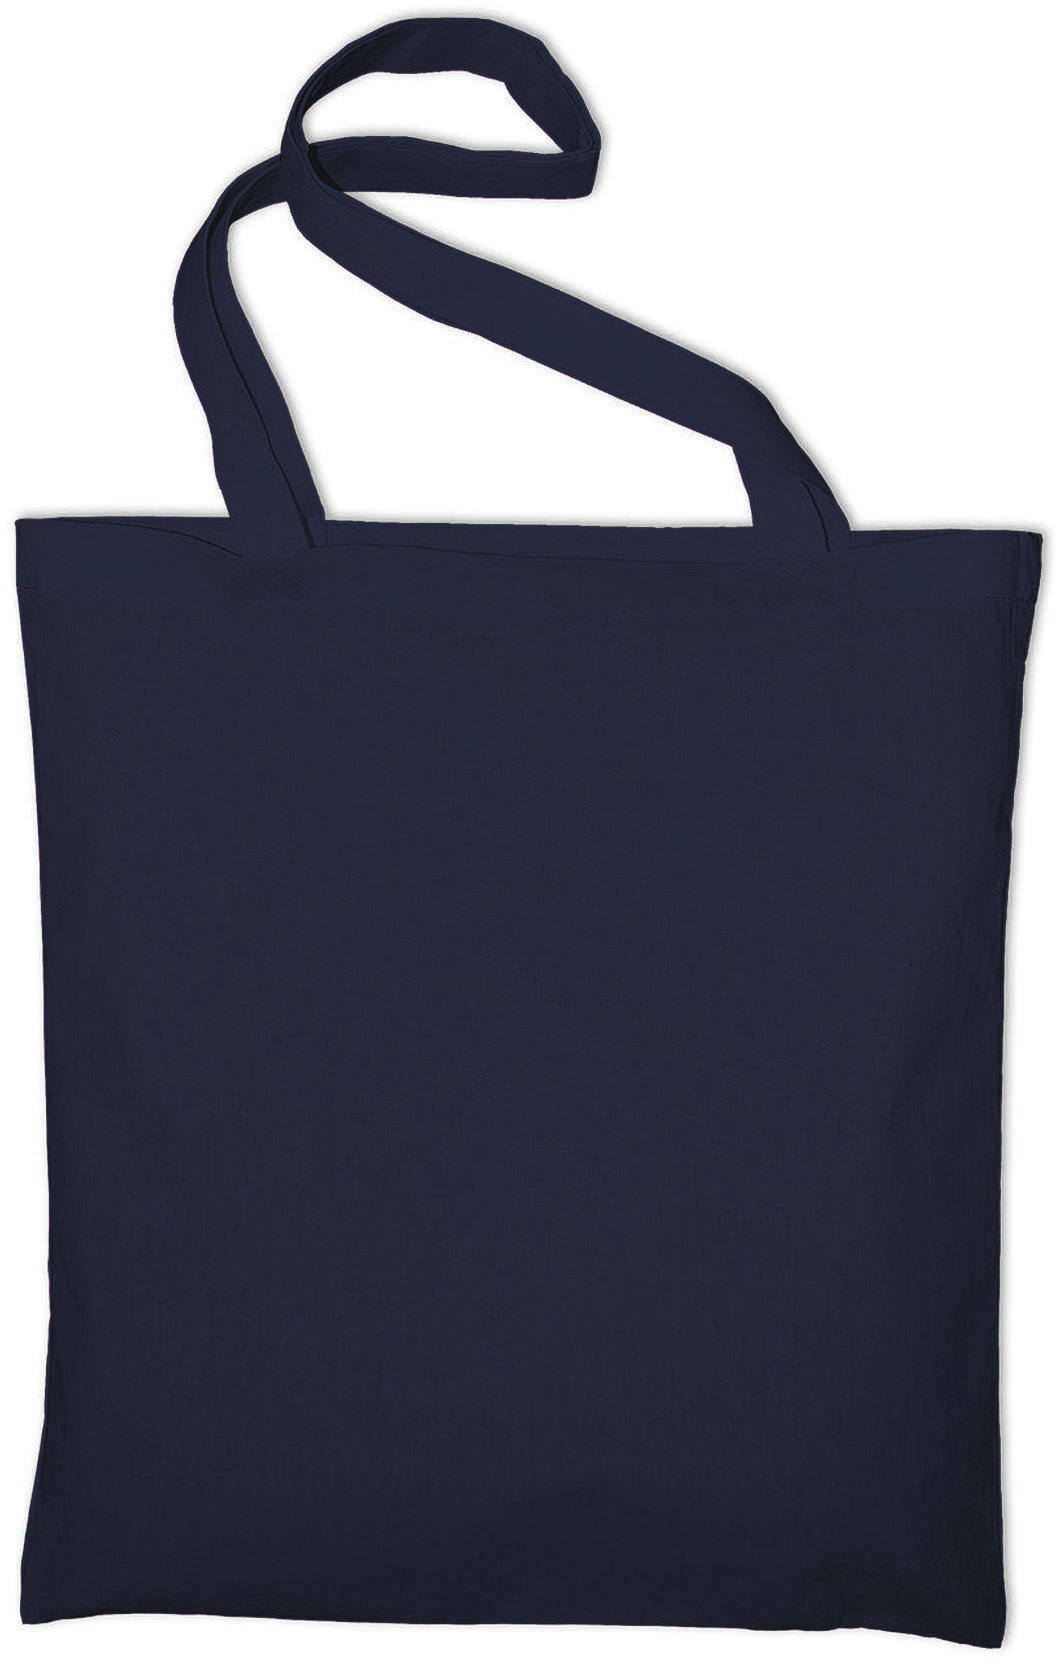 Cotton bag (NG6217444) - Shopping bags - Enjoy Gifts EN - Promotional  Products, Giveaways and Corporate Gifts